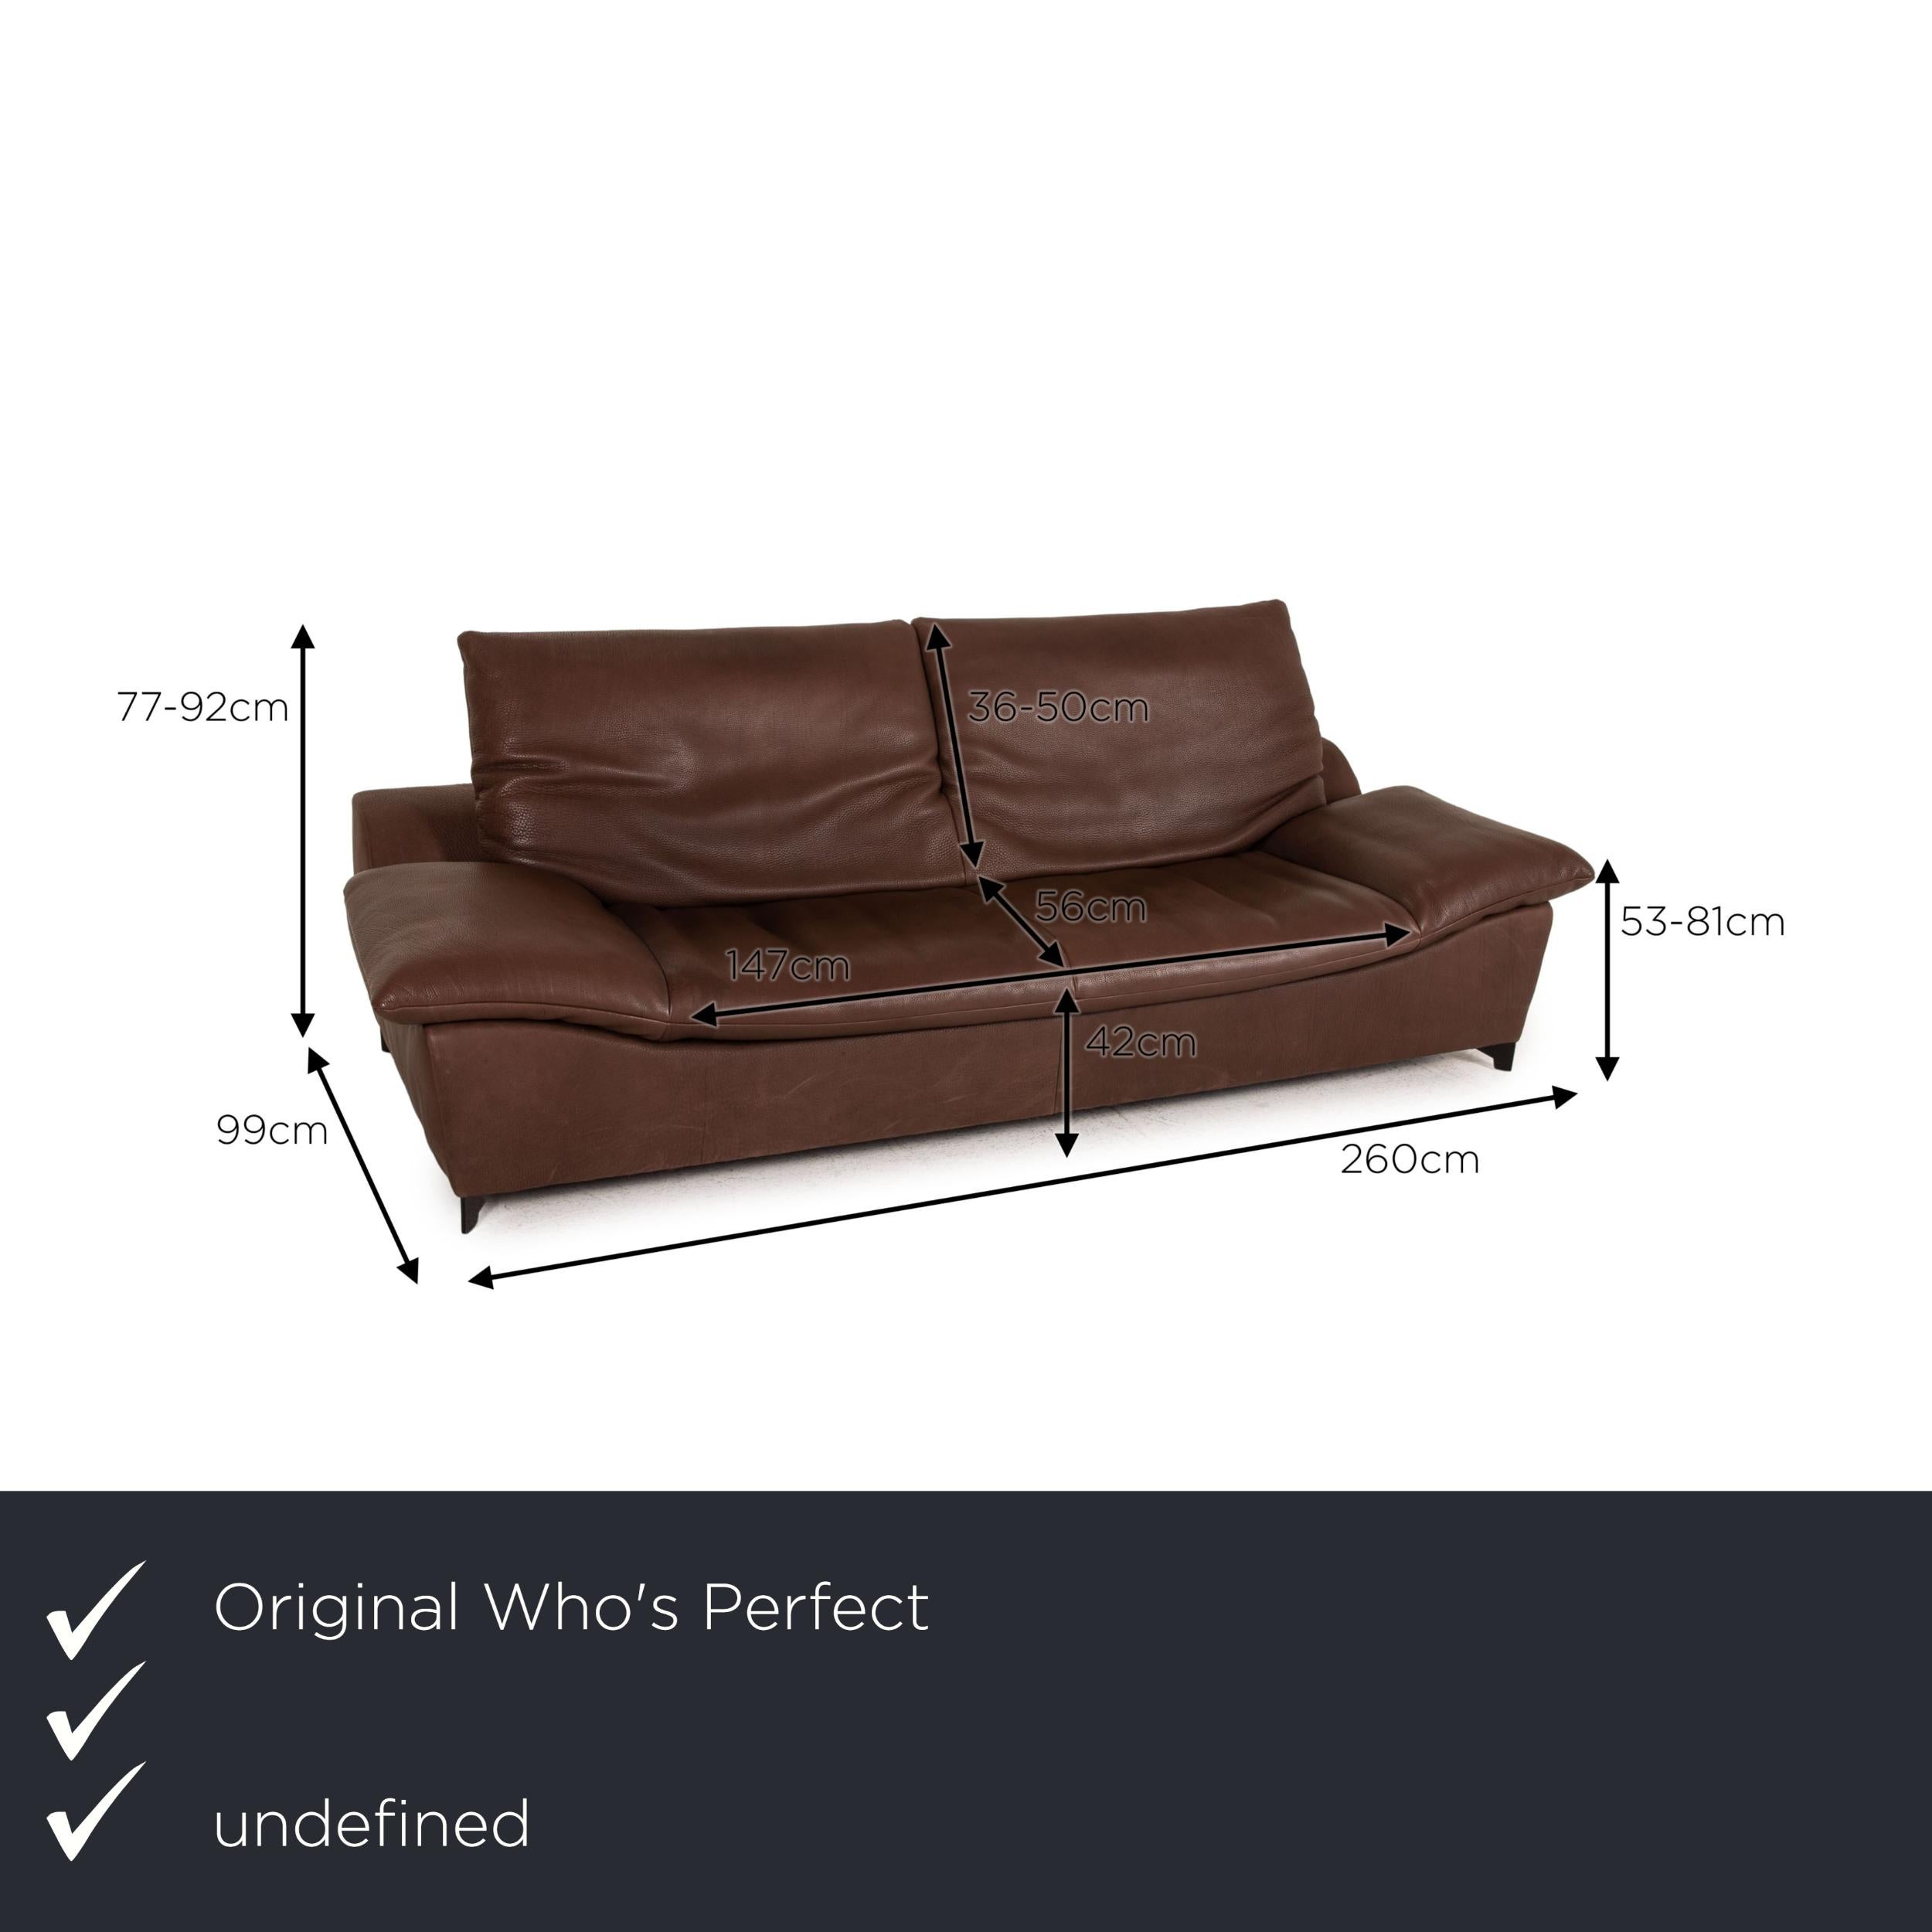 We present to you a Who's Perfect Minnesota leather sofa set brown 1 three-seater 1 stool function.
 

 Product measurements in centimeters:
 

Depth: 99
Width: 260
Height: 77
Seat height: 42
Rest height: 53
Seat depth: 56
Seat width: